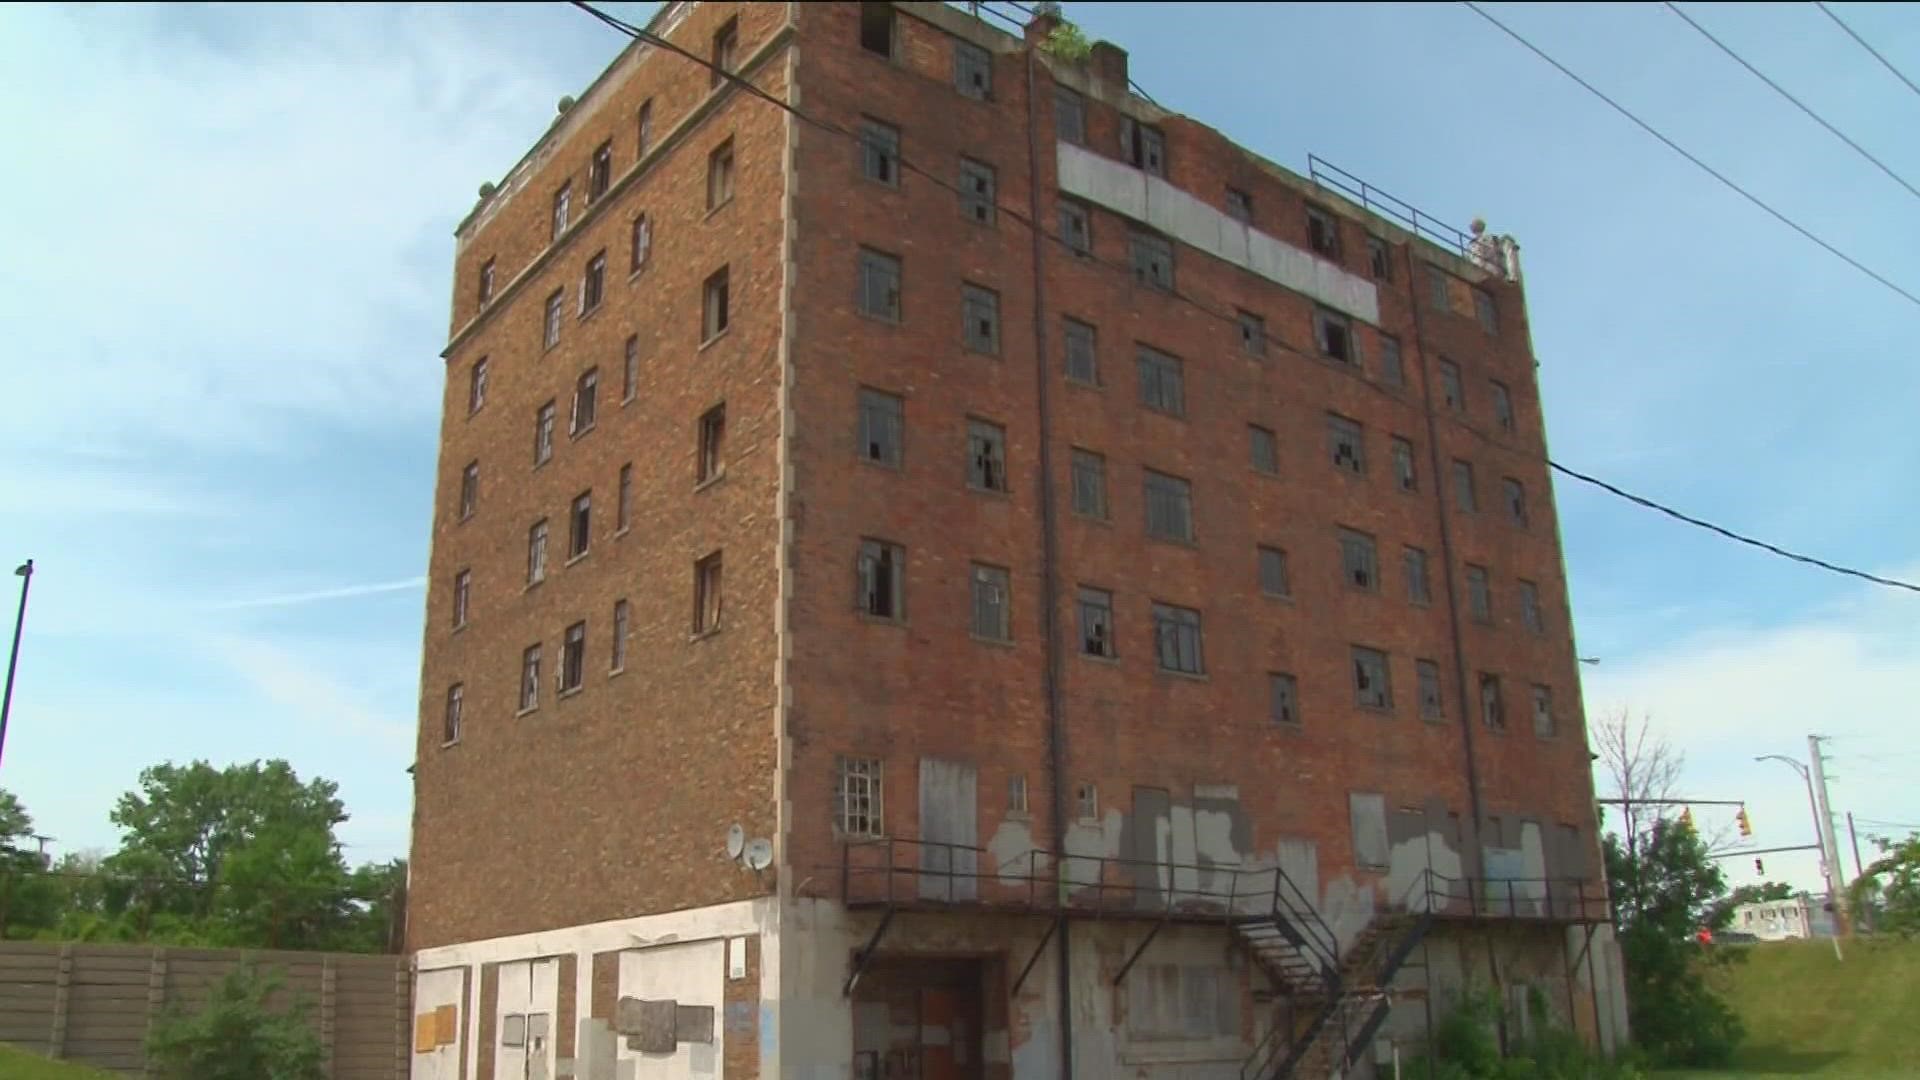 City leaders called the Rosemary Apartments a "blighted building."